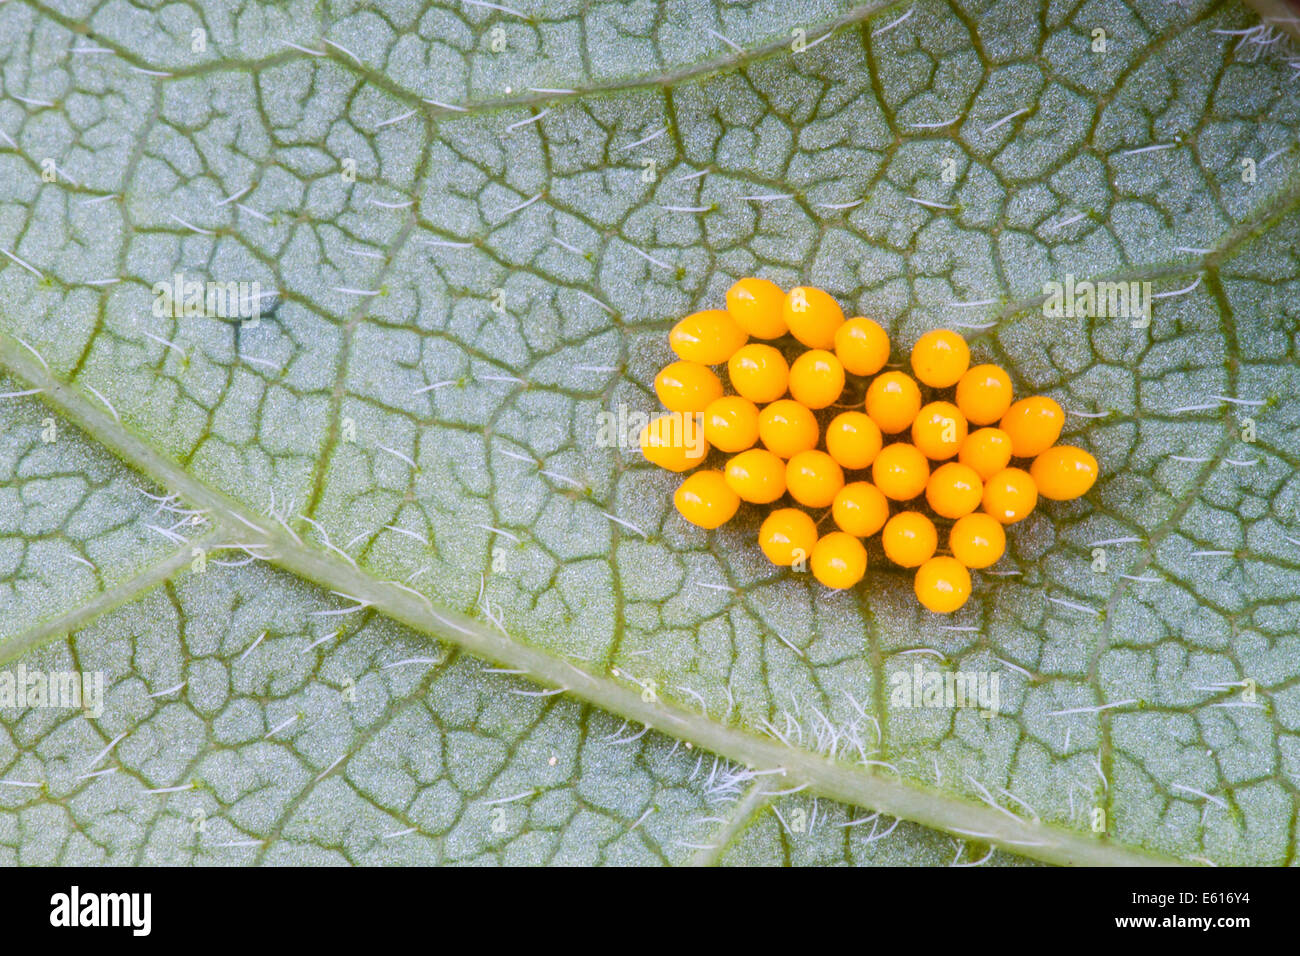 Eggs of a Seven-spot Ladybird (Coccinella septempunctata) on a leaf underside, North Hesse, Hesse, Germany Stock Photo